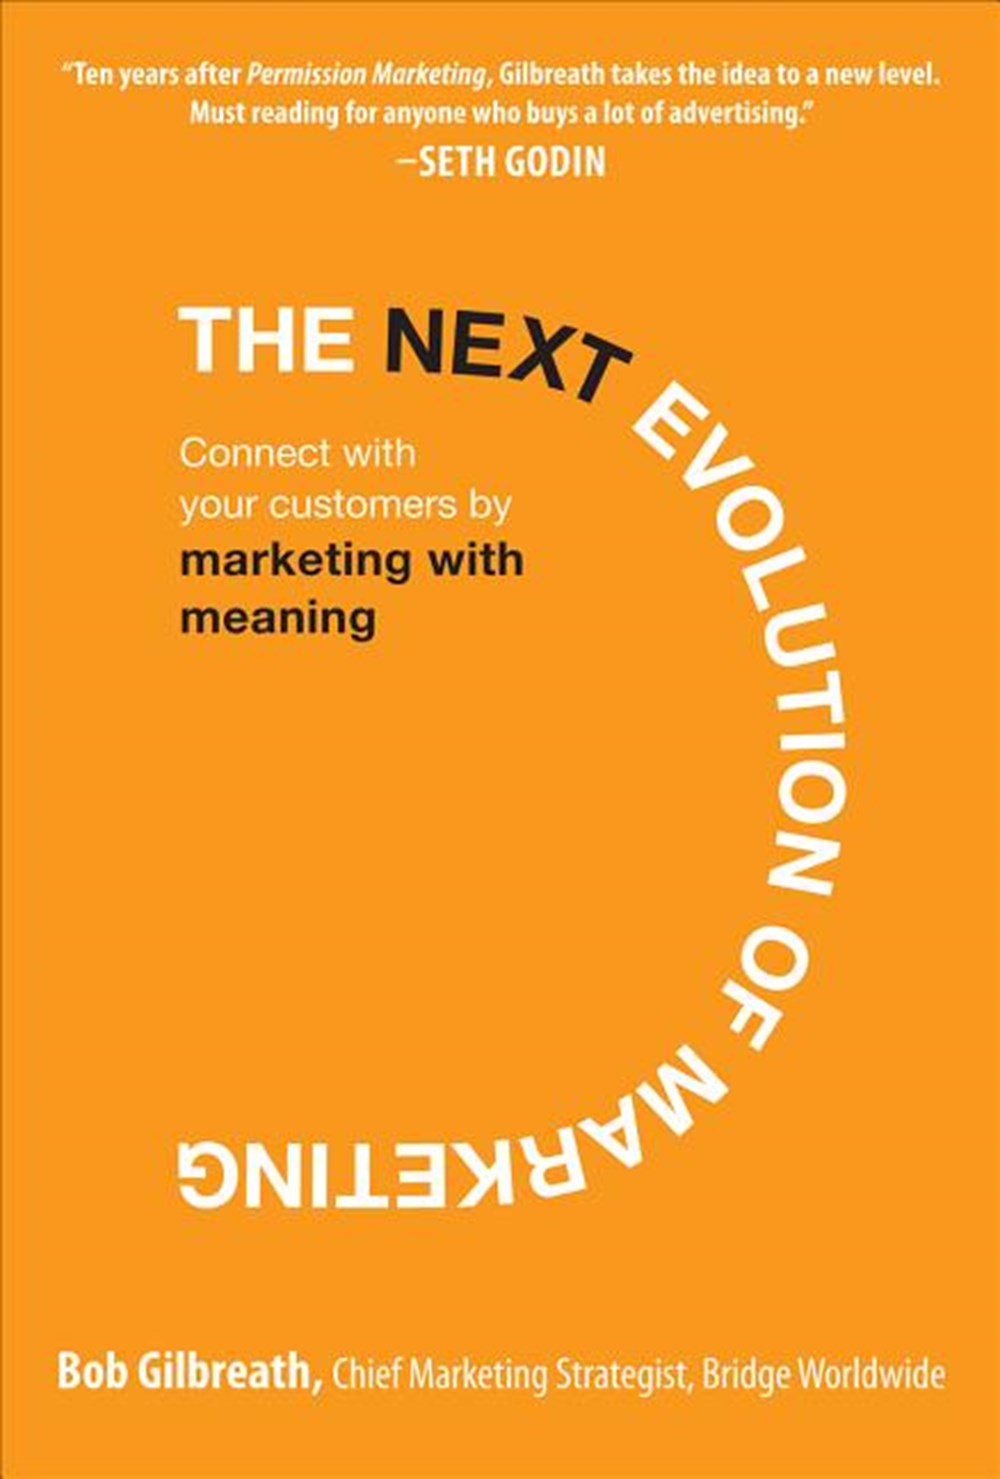 Next Evolution of Marketing Connect with Your Customers by Marketing with Meaning